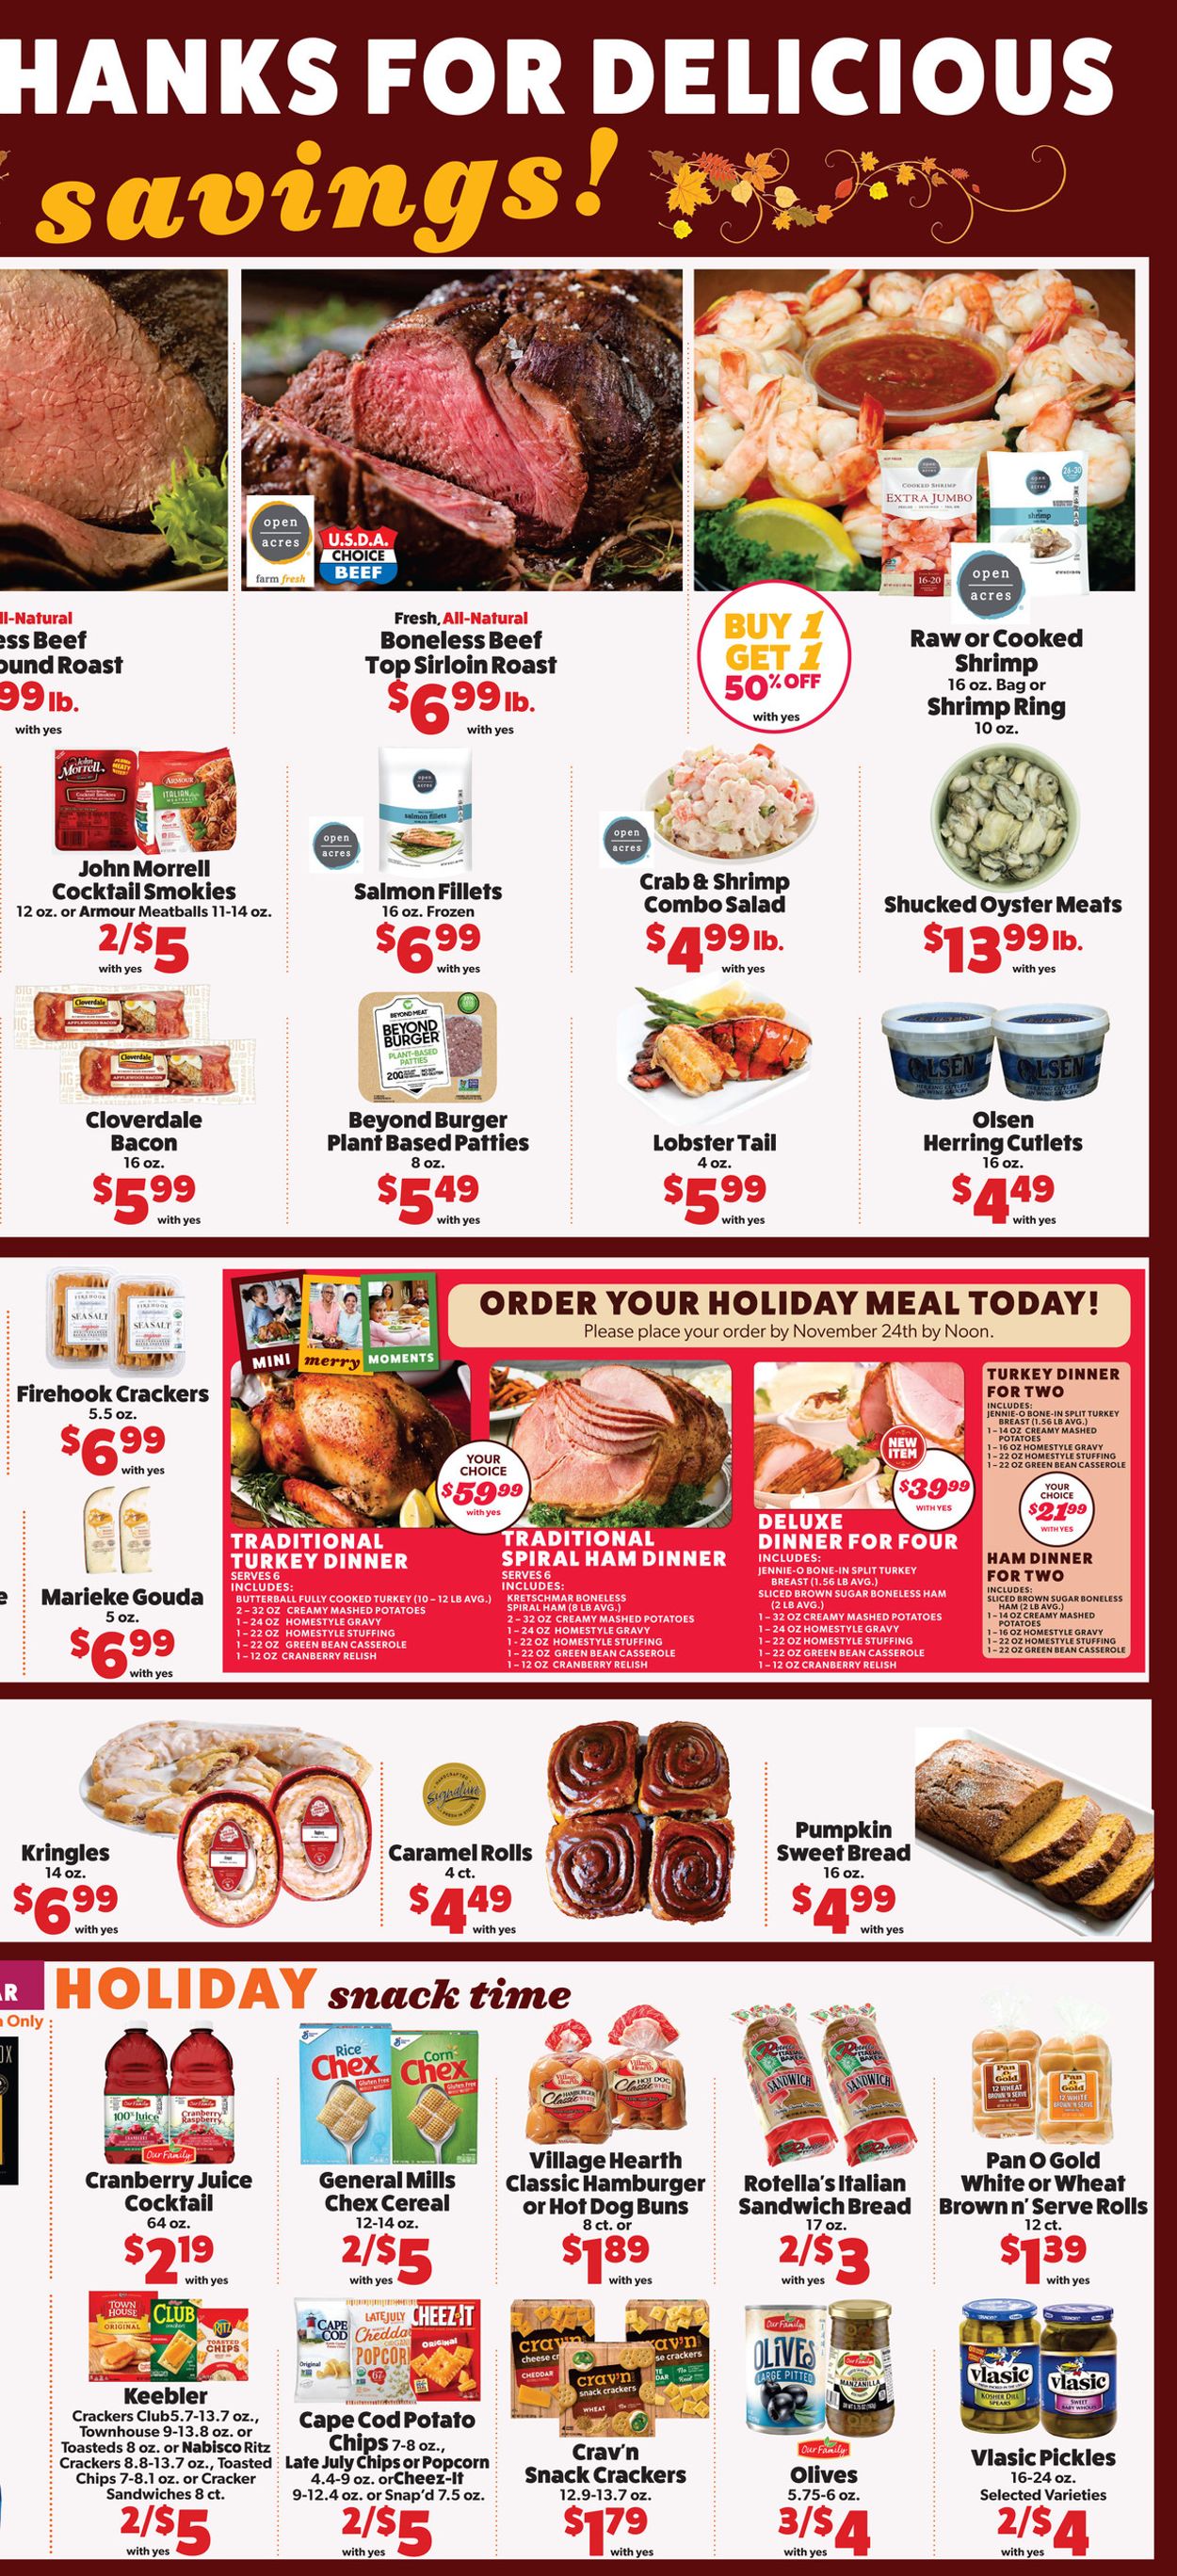 Catalogue Family Fare Thanksgiving ad 2020 from 11/18/2020